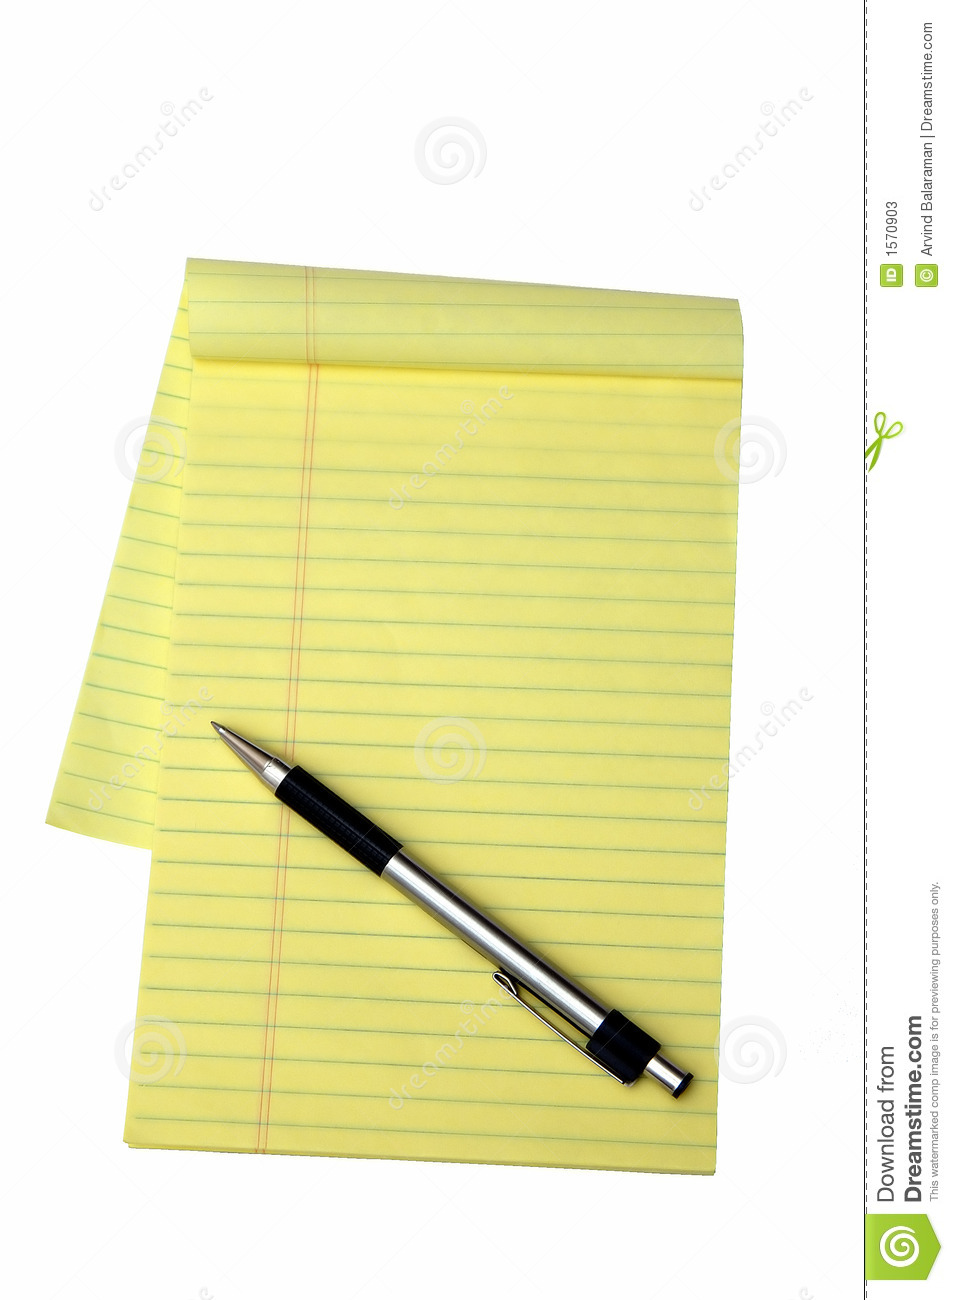 Yellow Notepad And A Pen Isolated In A White Background